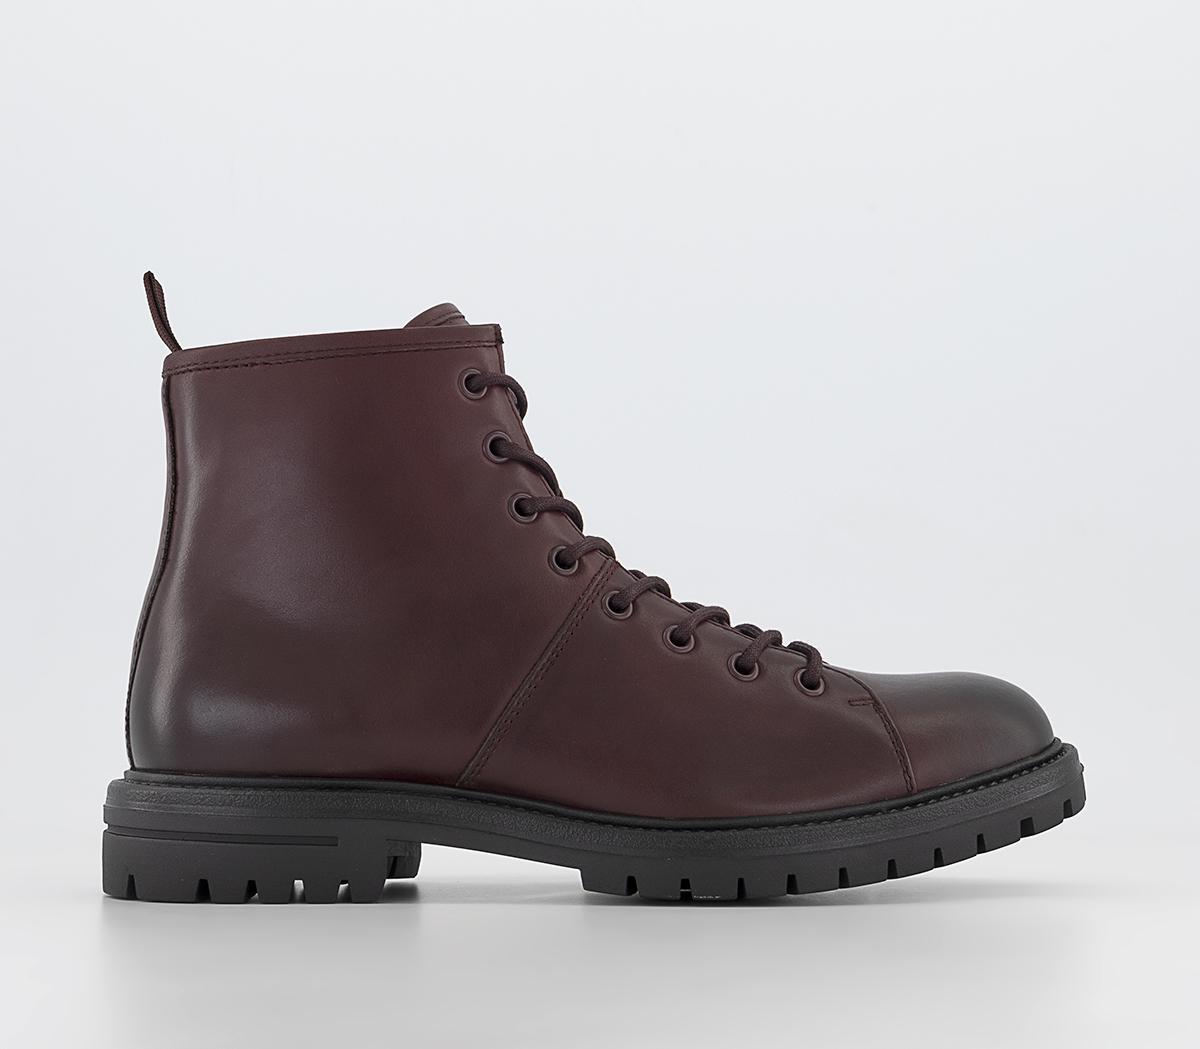 OFFICE Bumble Monkey Boots Burgundy Leather - Men’s Boots